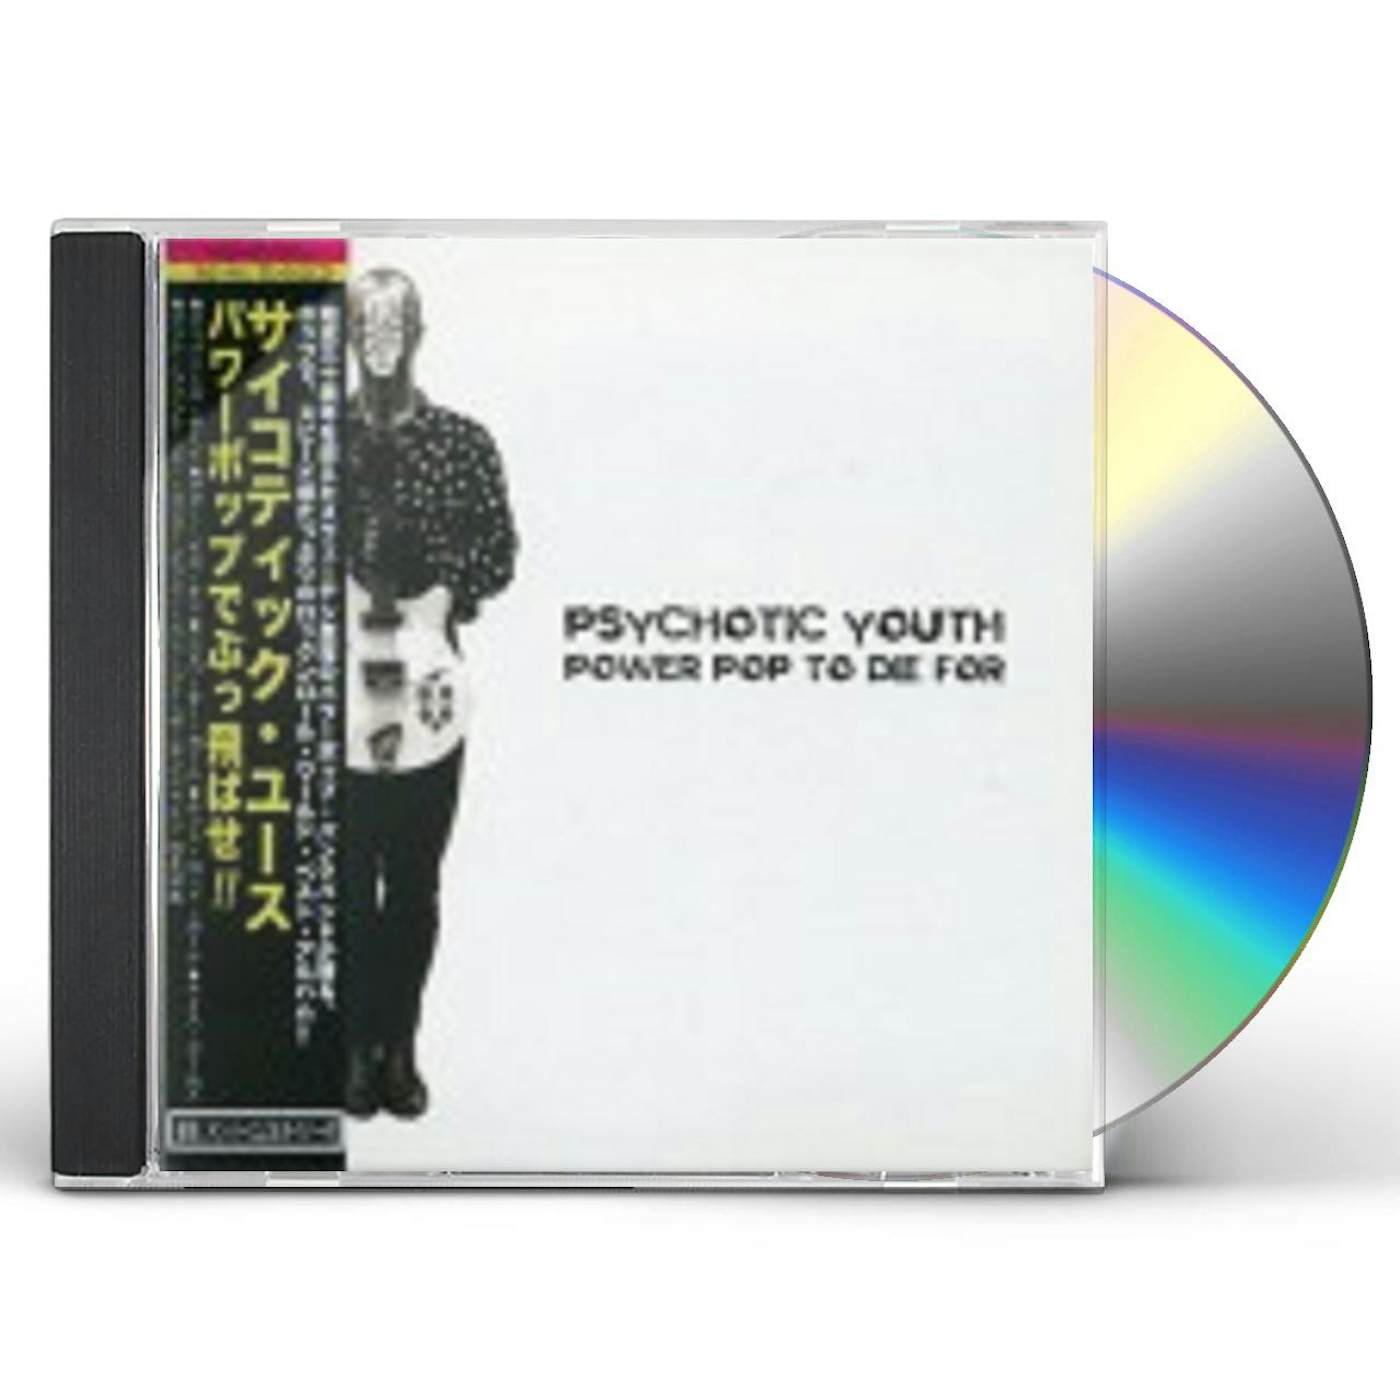 Psychotic Youth POWER POP TO DIE FOR CD